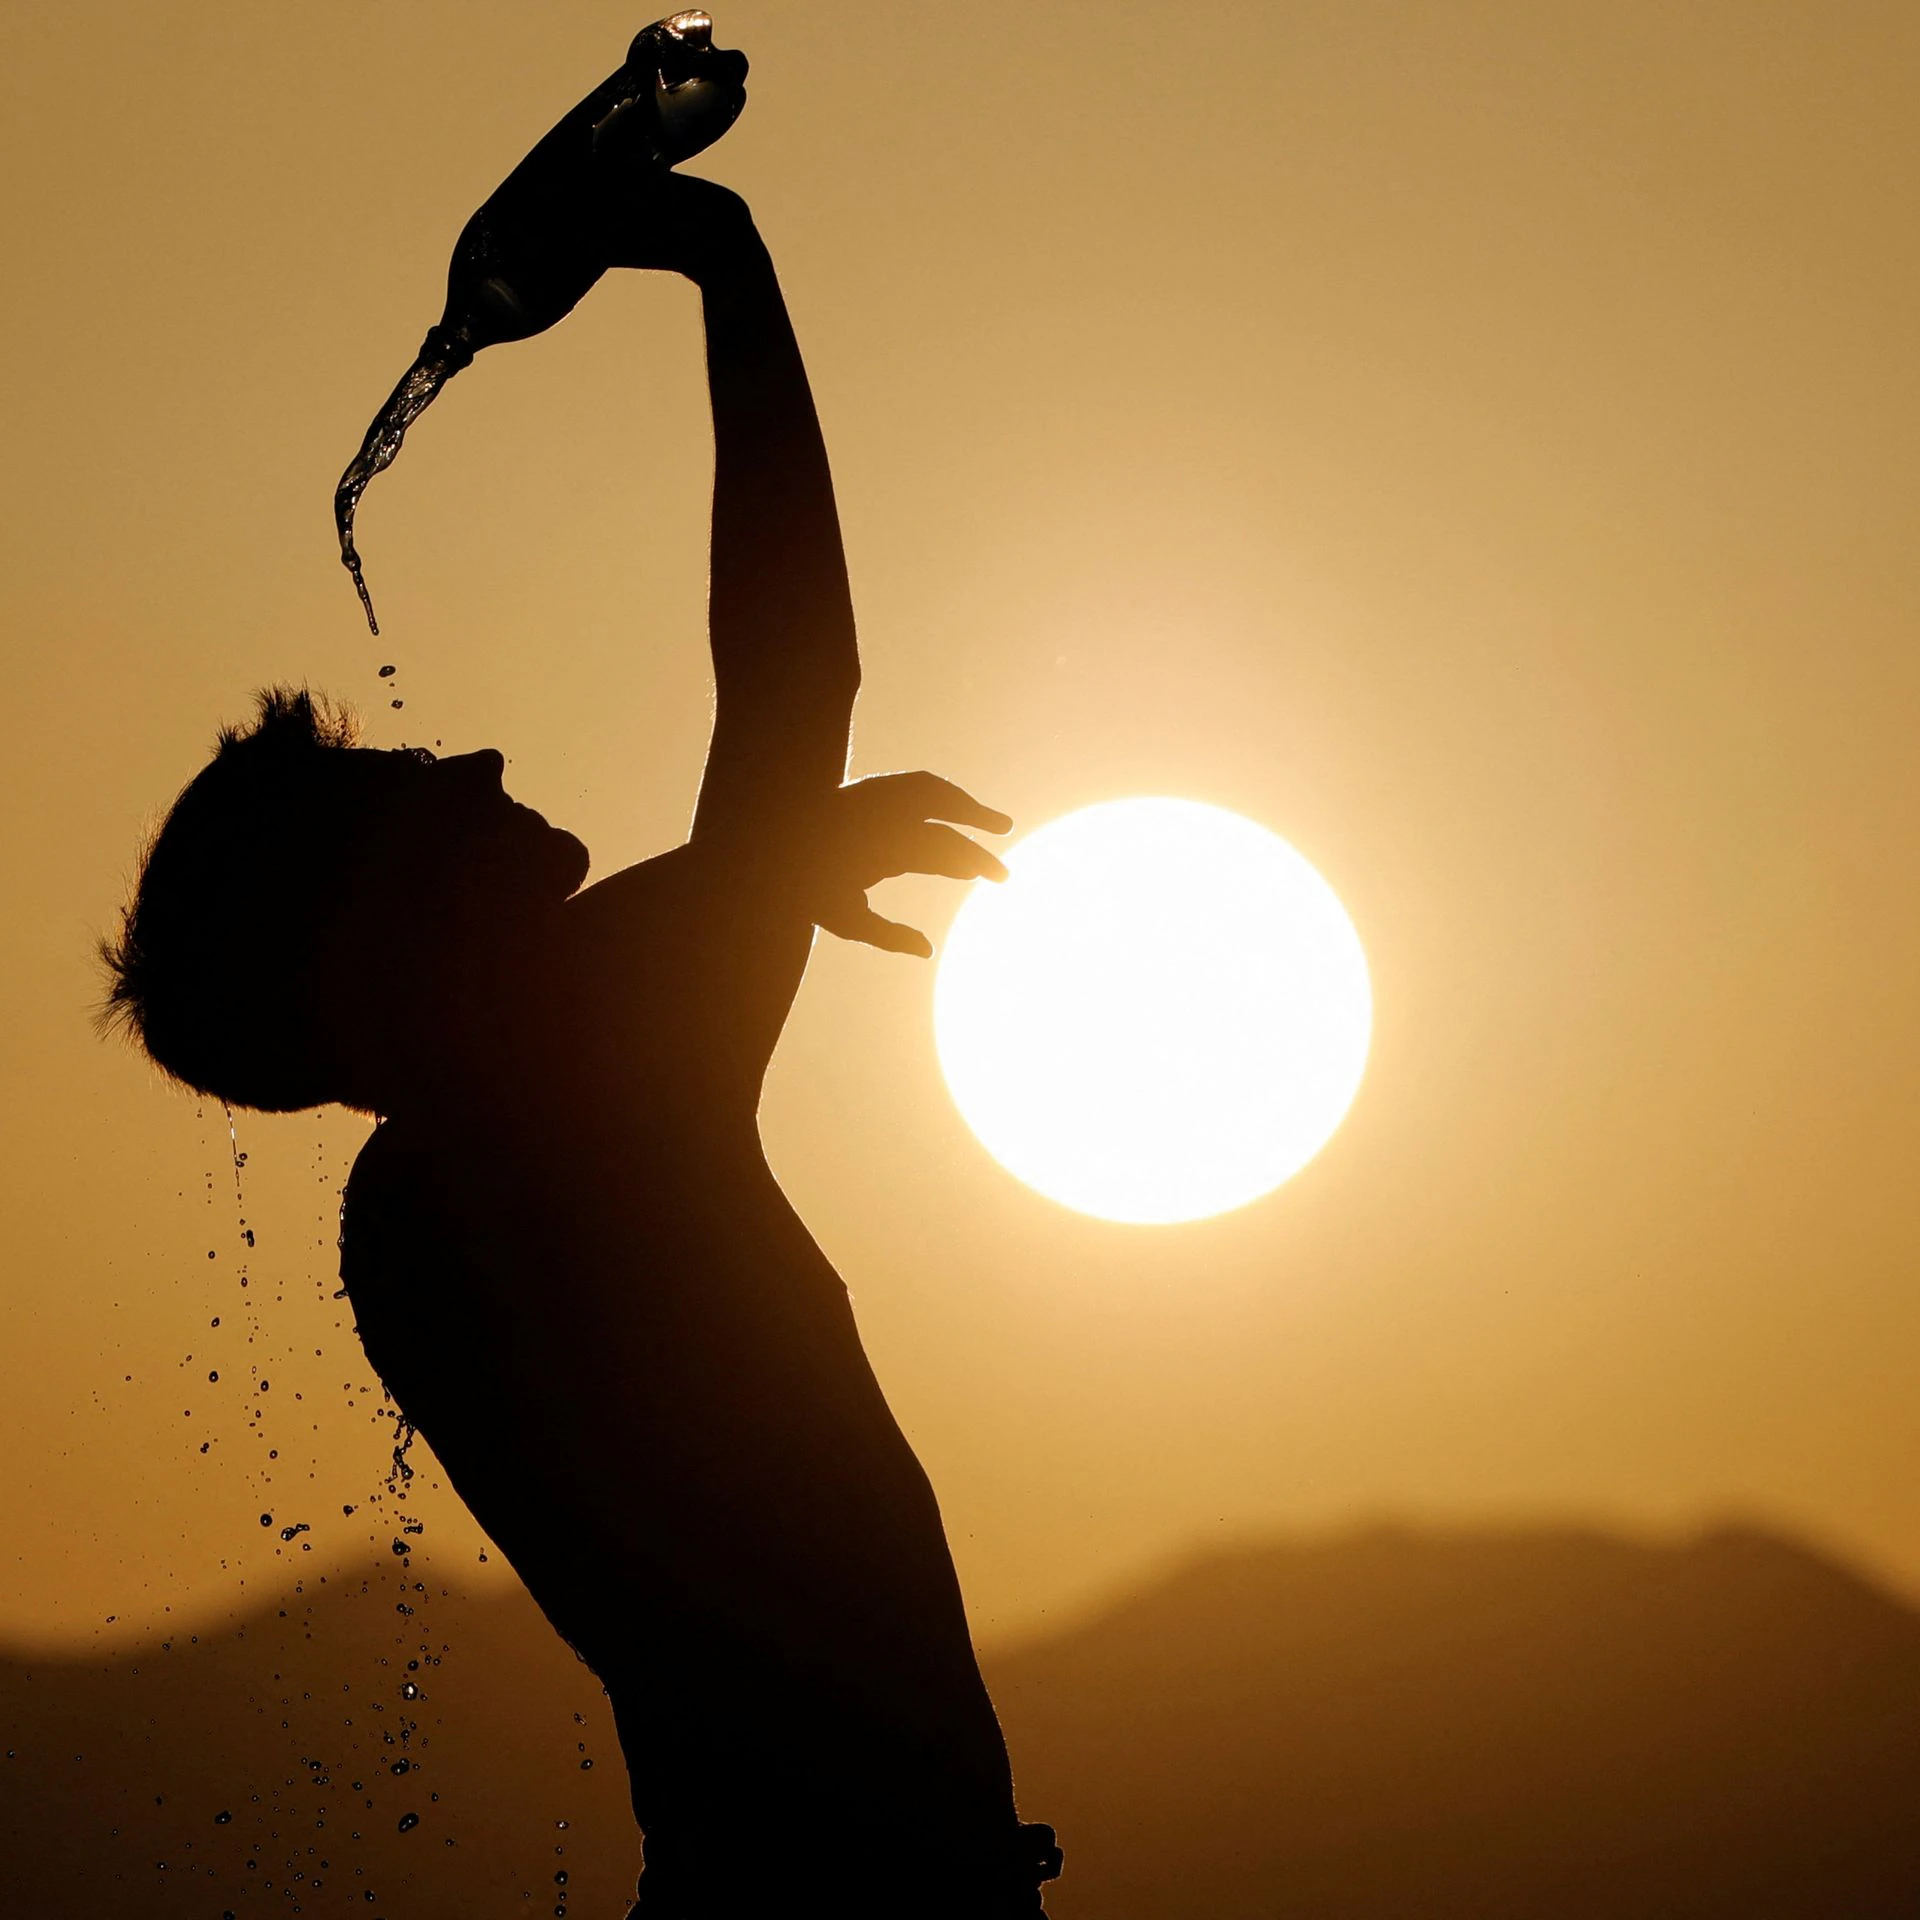 Cerberus Heatwave Southern Europe: Record-Breaking Temperatures on the Horizon